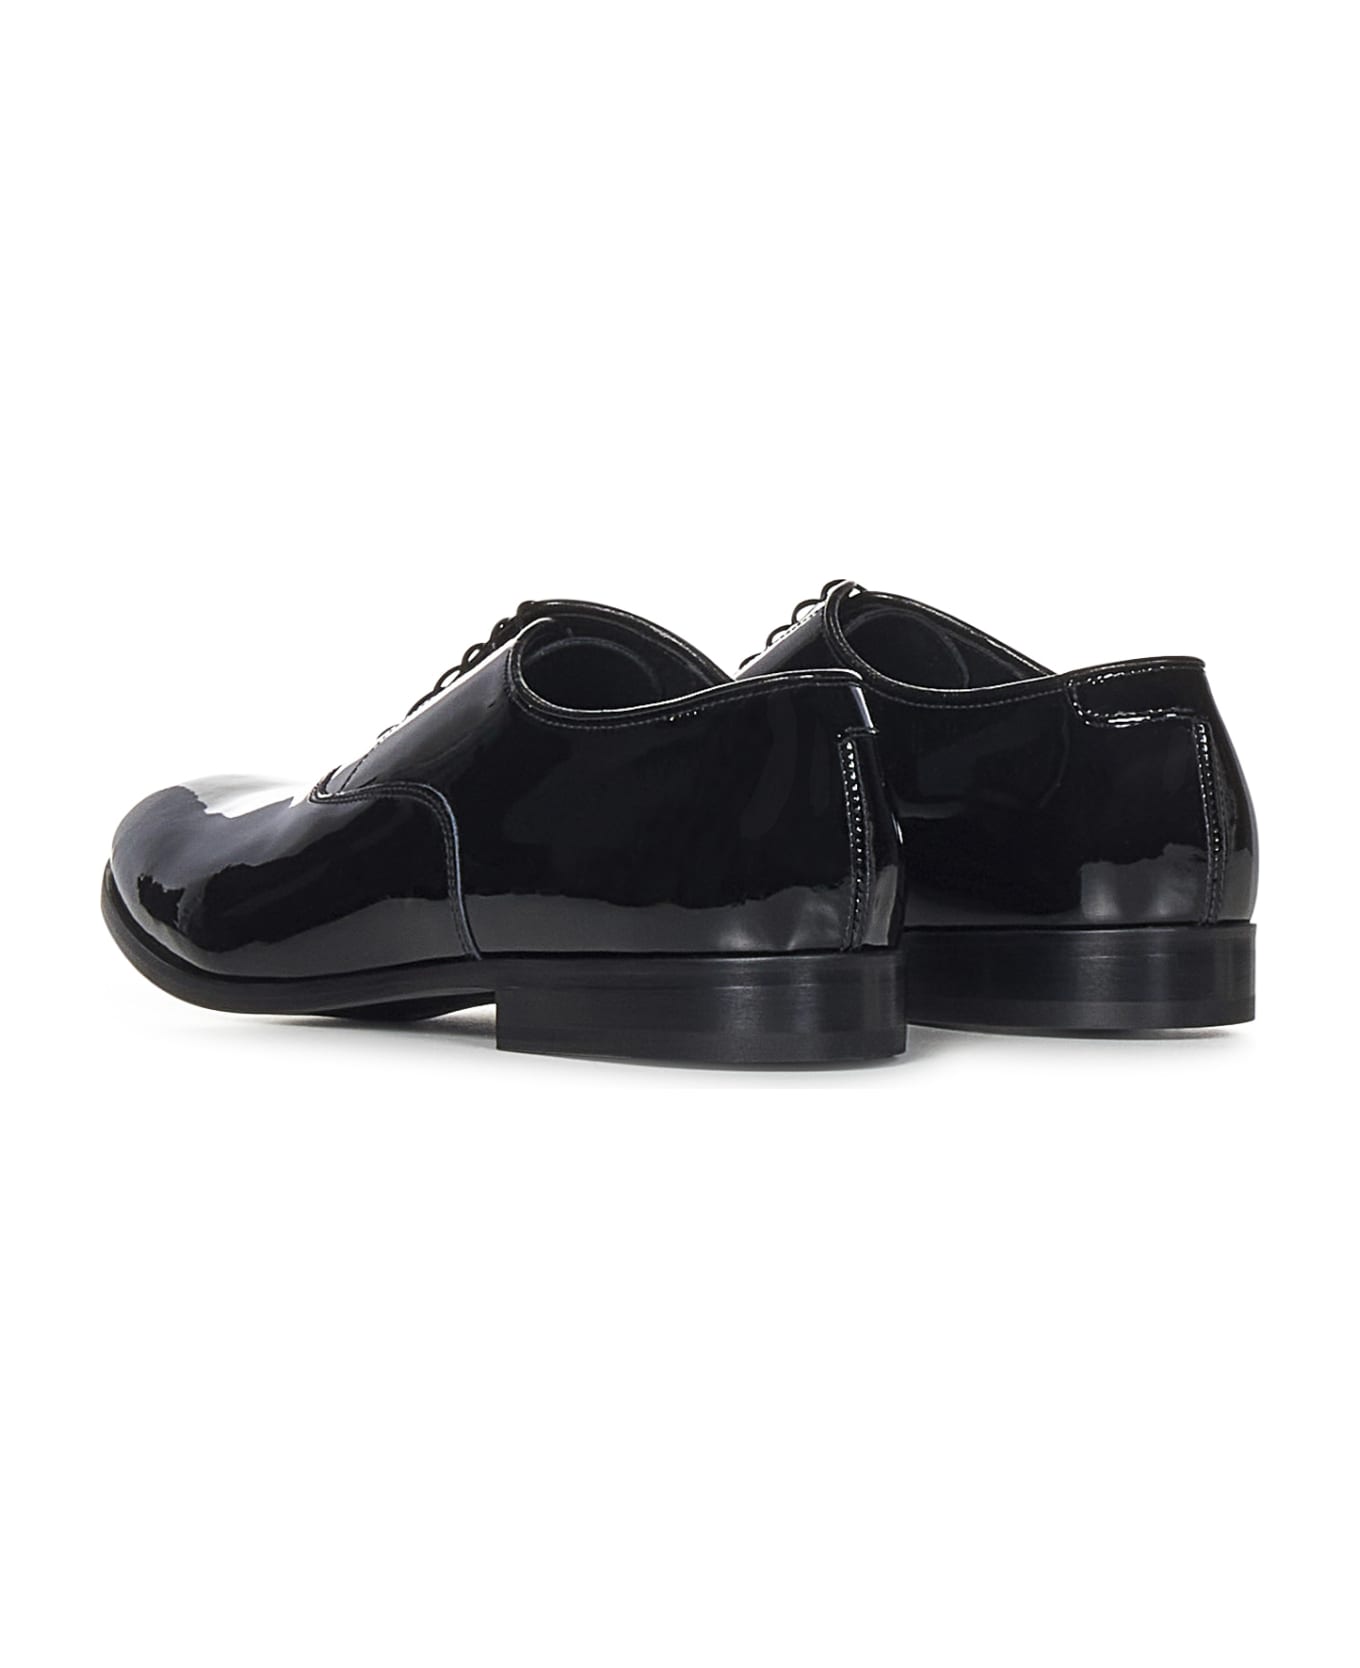 Doucal's Patent Leather Oxford Shoes - FDO NERO